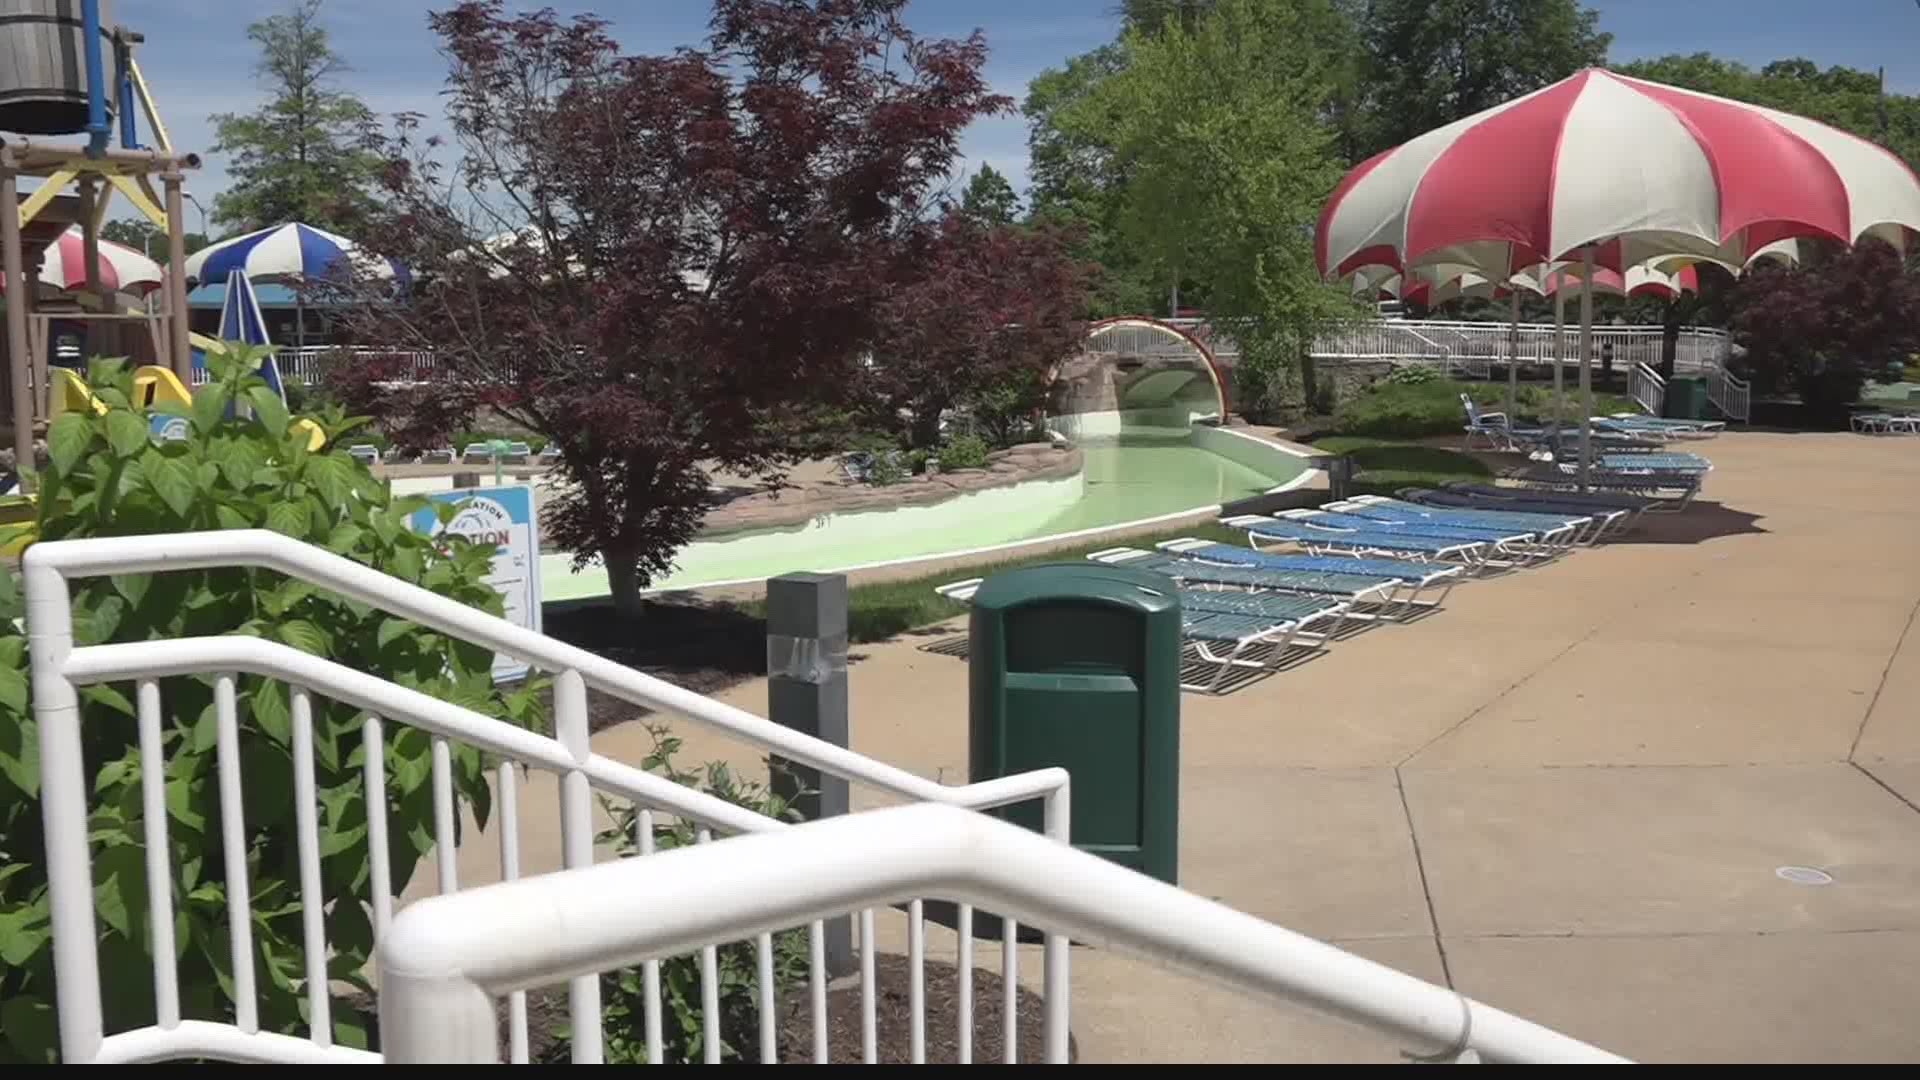 When will pools reopen in St. Louis? | 0